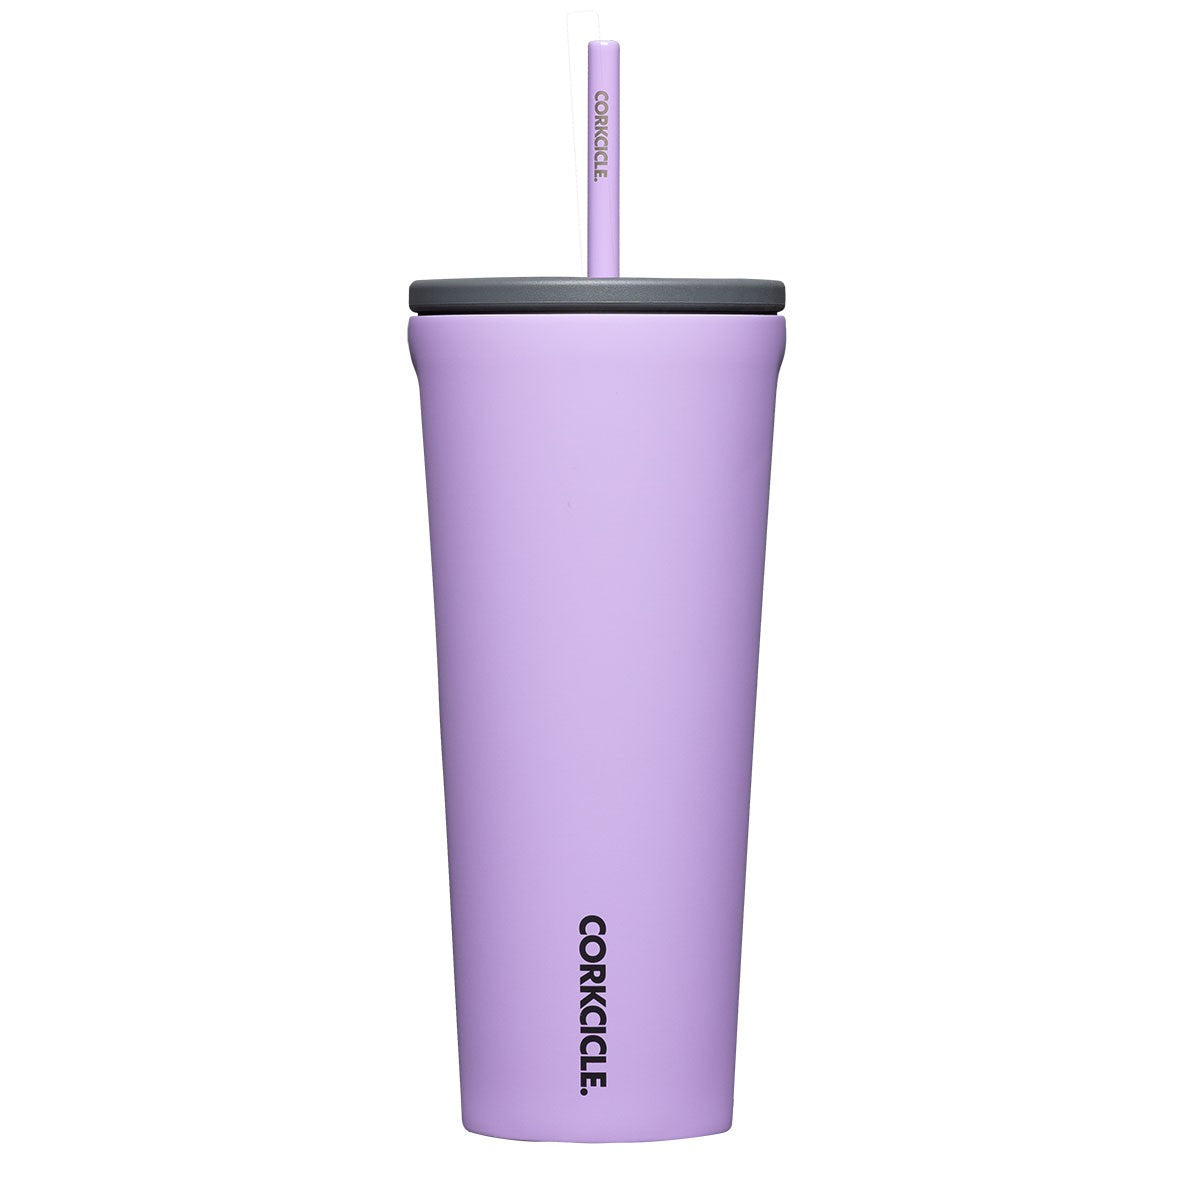 Corkcicle Cold Cup 24oz. Sun-Soaked Lilac